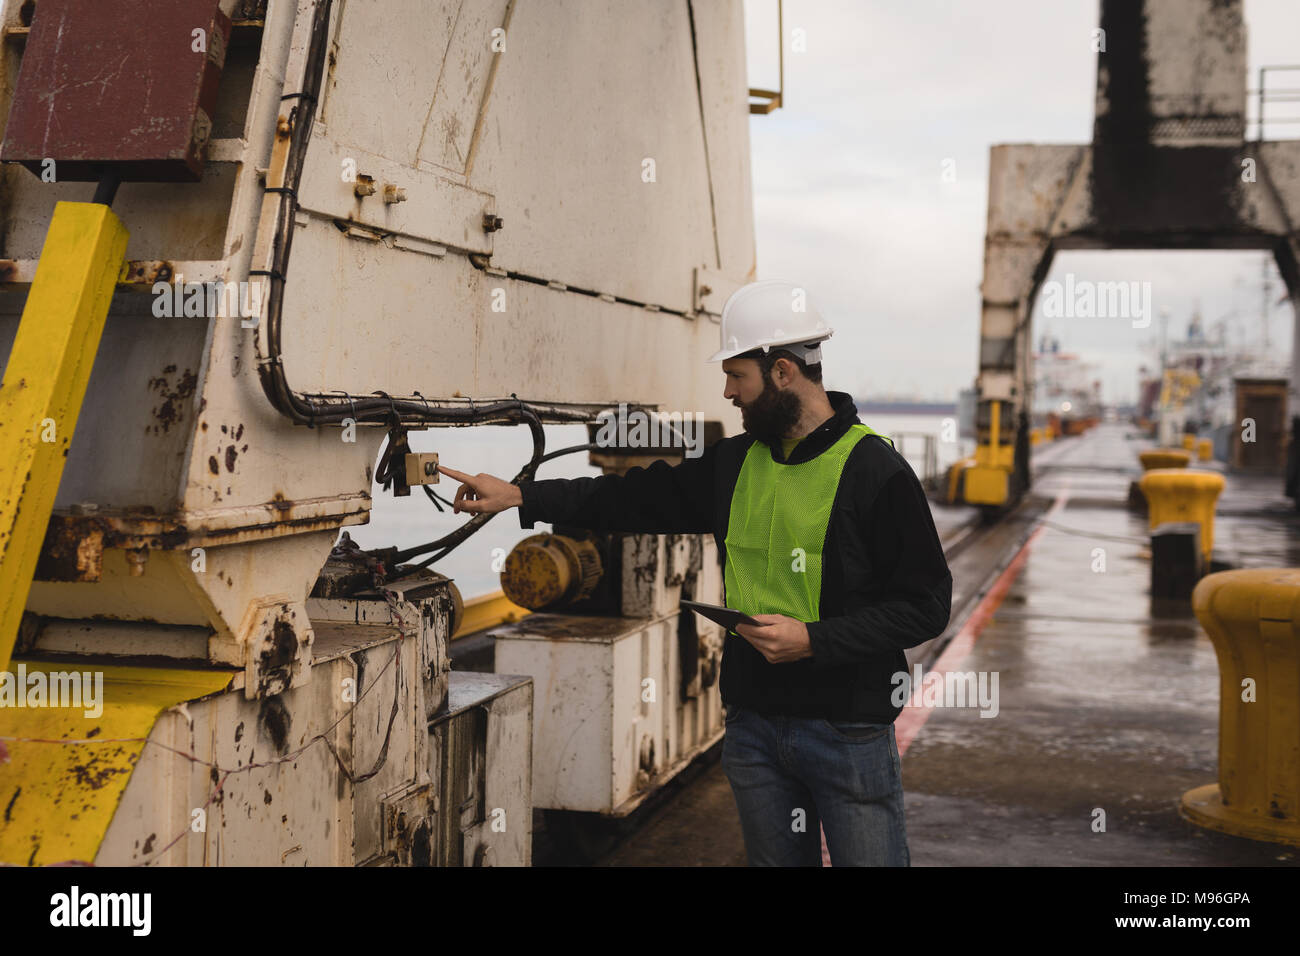 Dock worker pressing button of crane Stock Photo